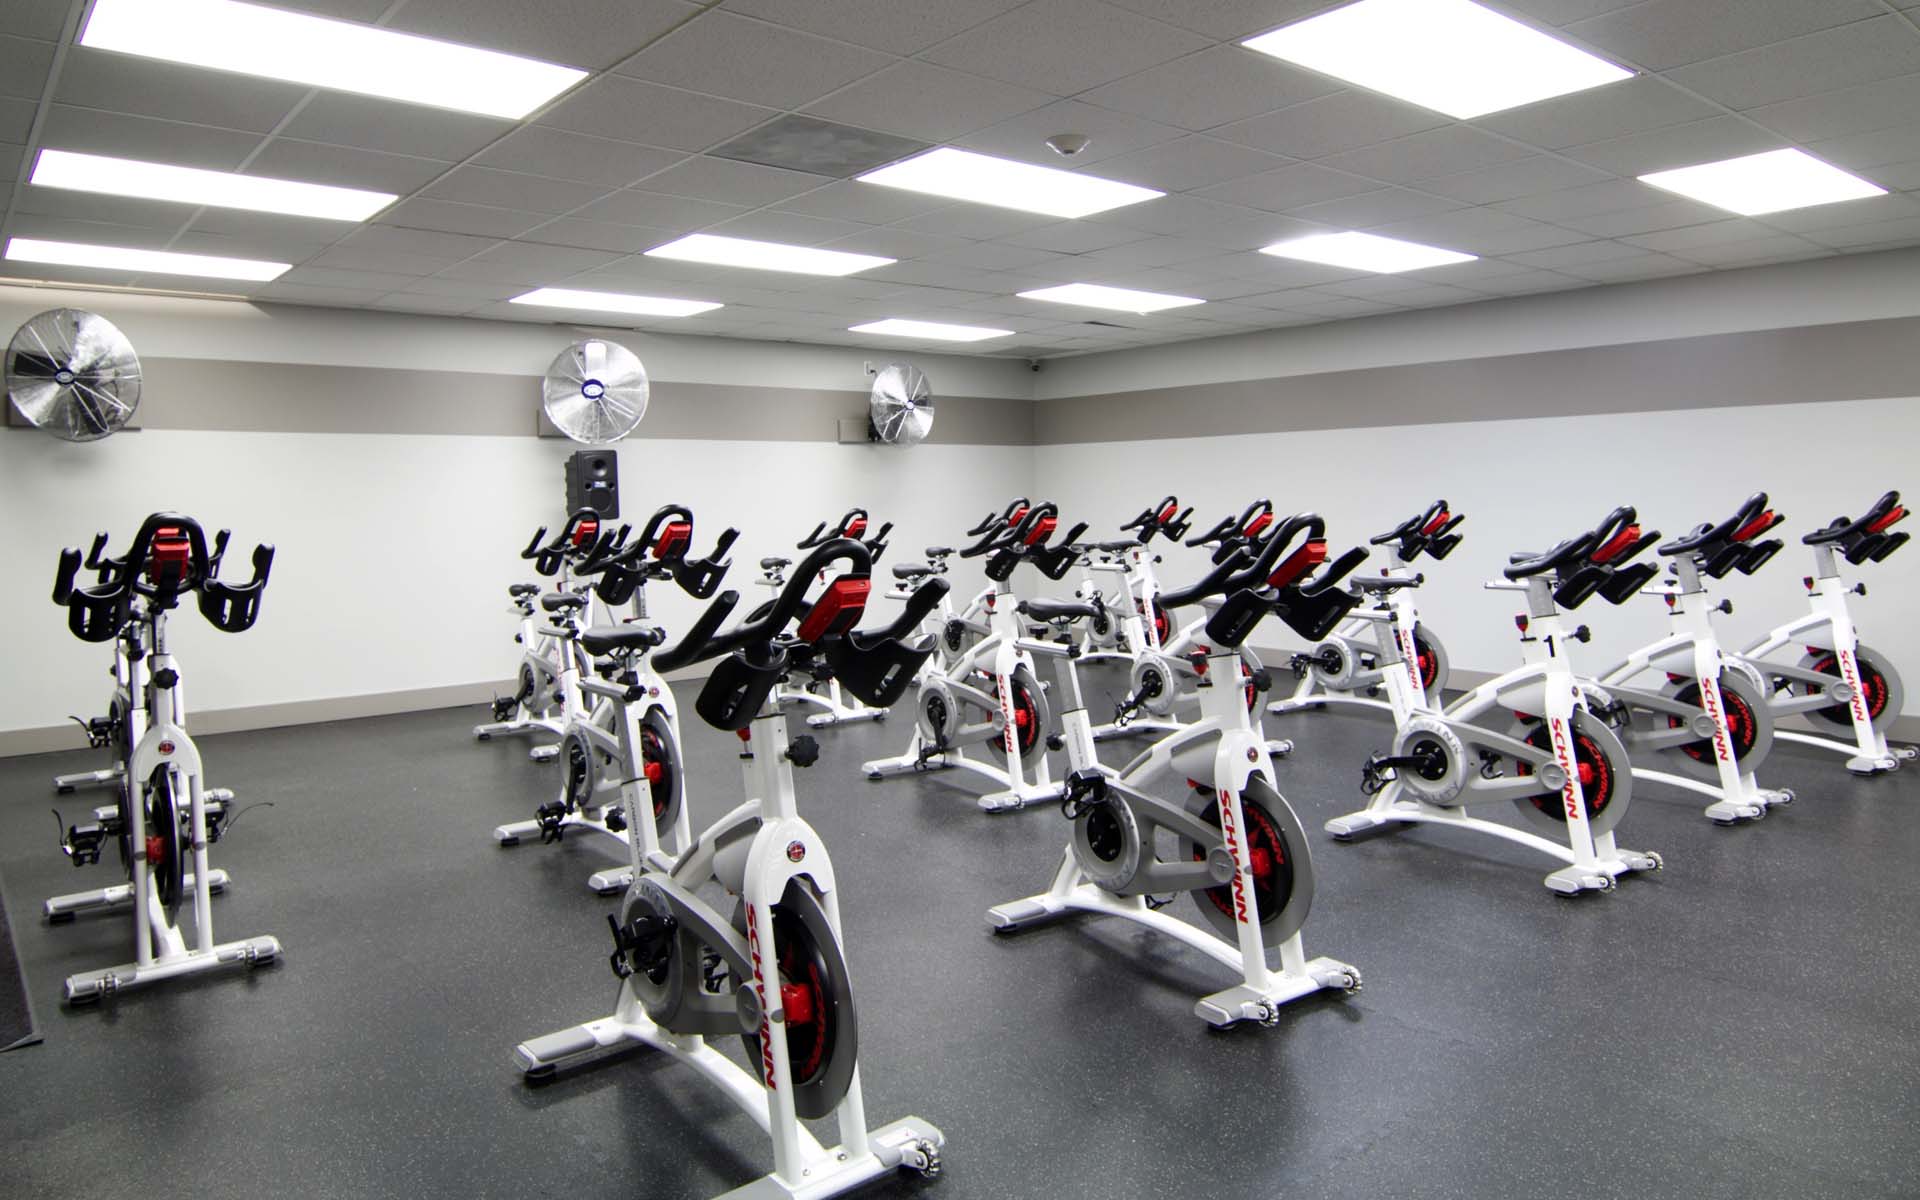 Broadview Heights Community & Recreation Center Spin